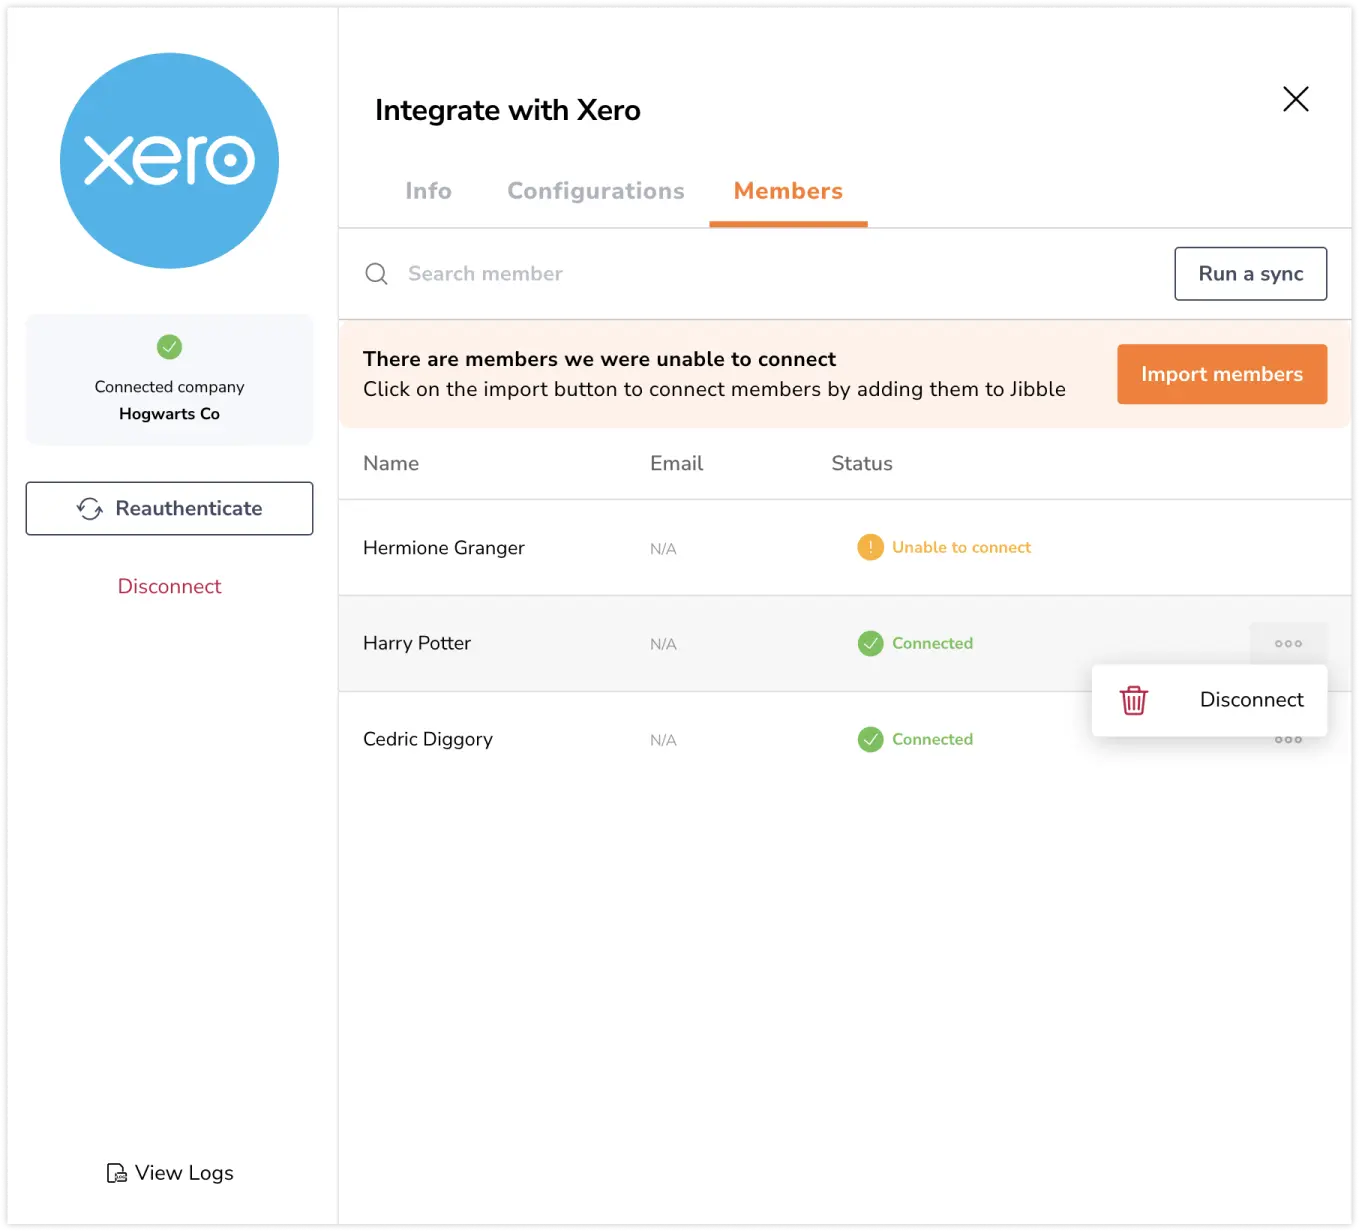 Disconnecting employees from Xero